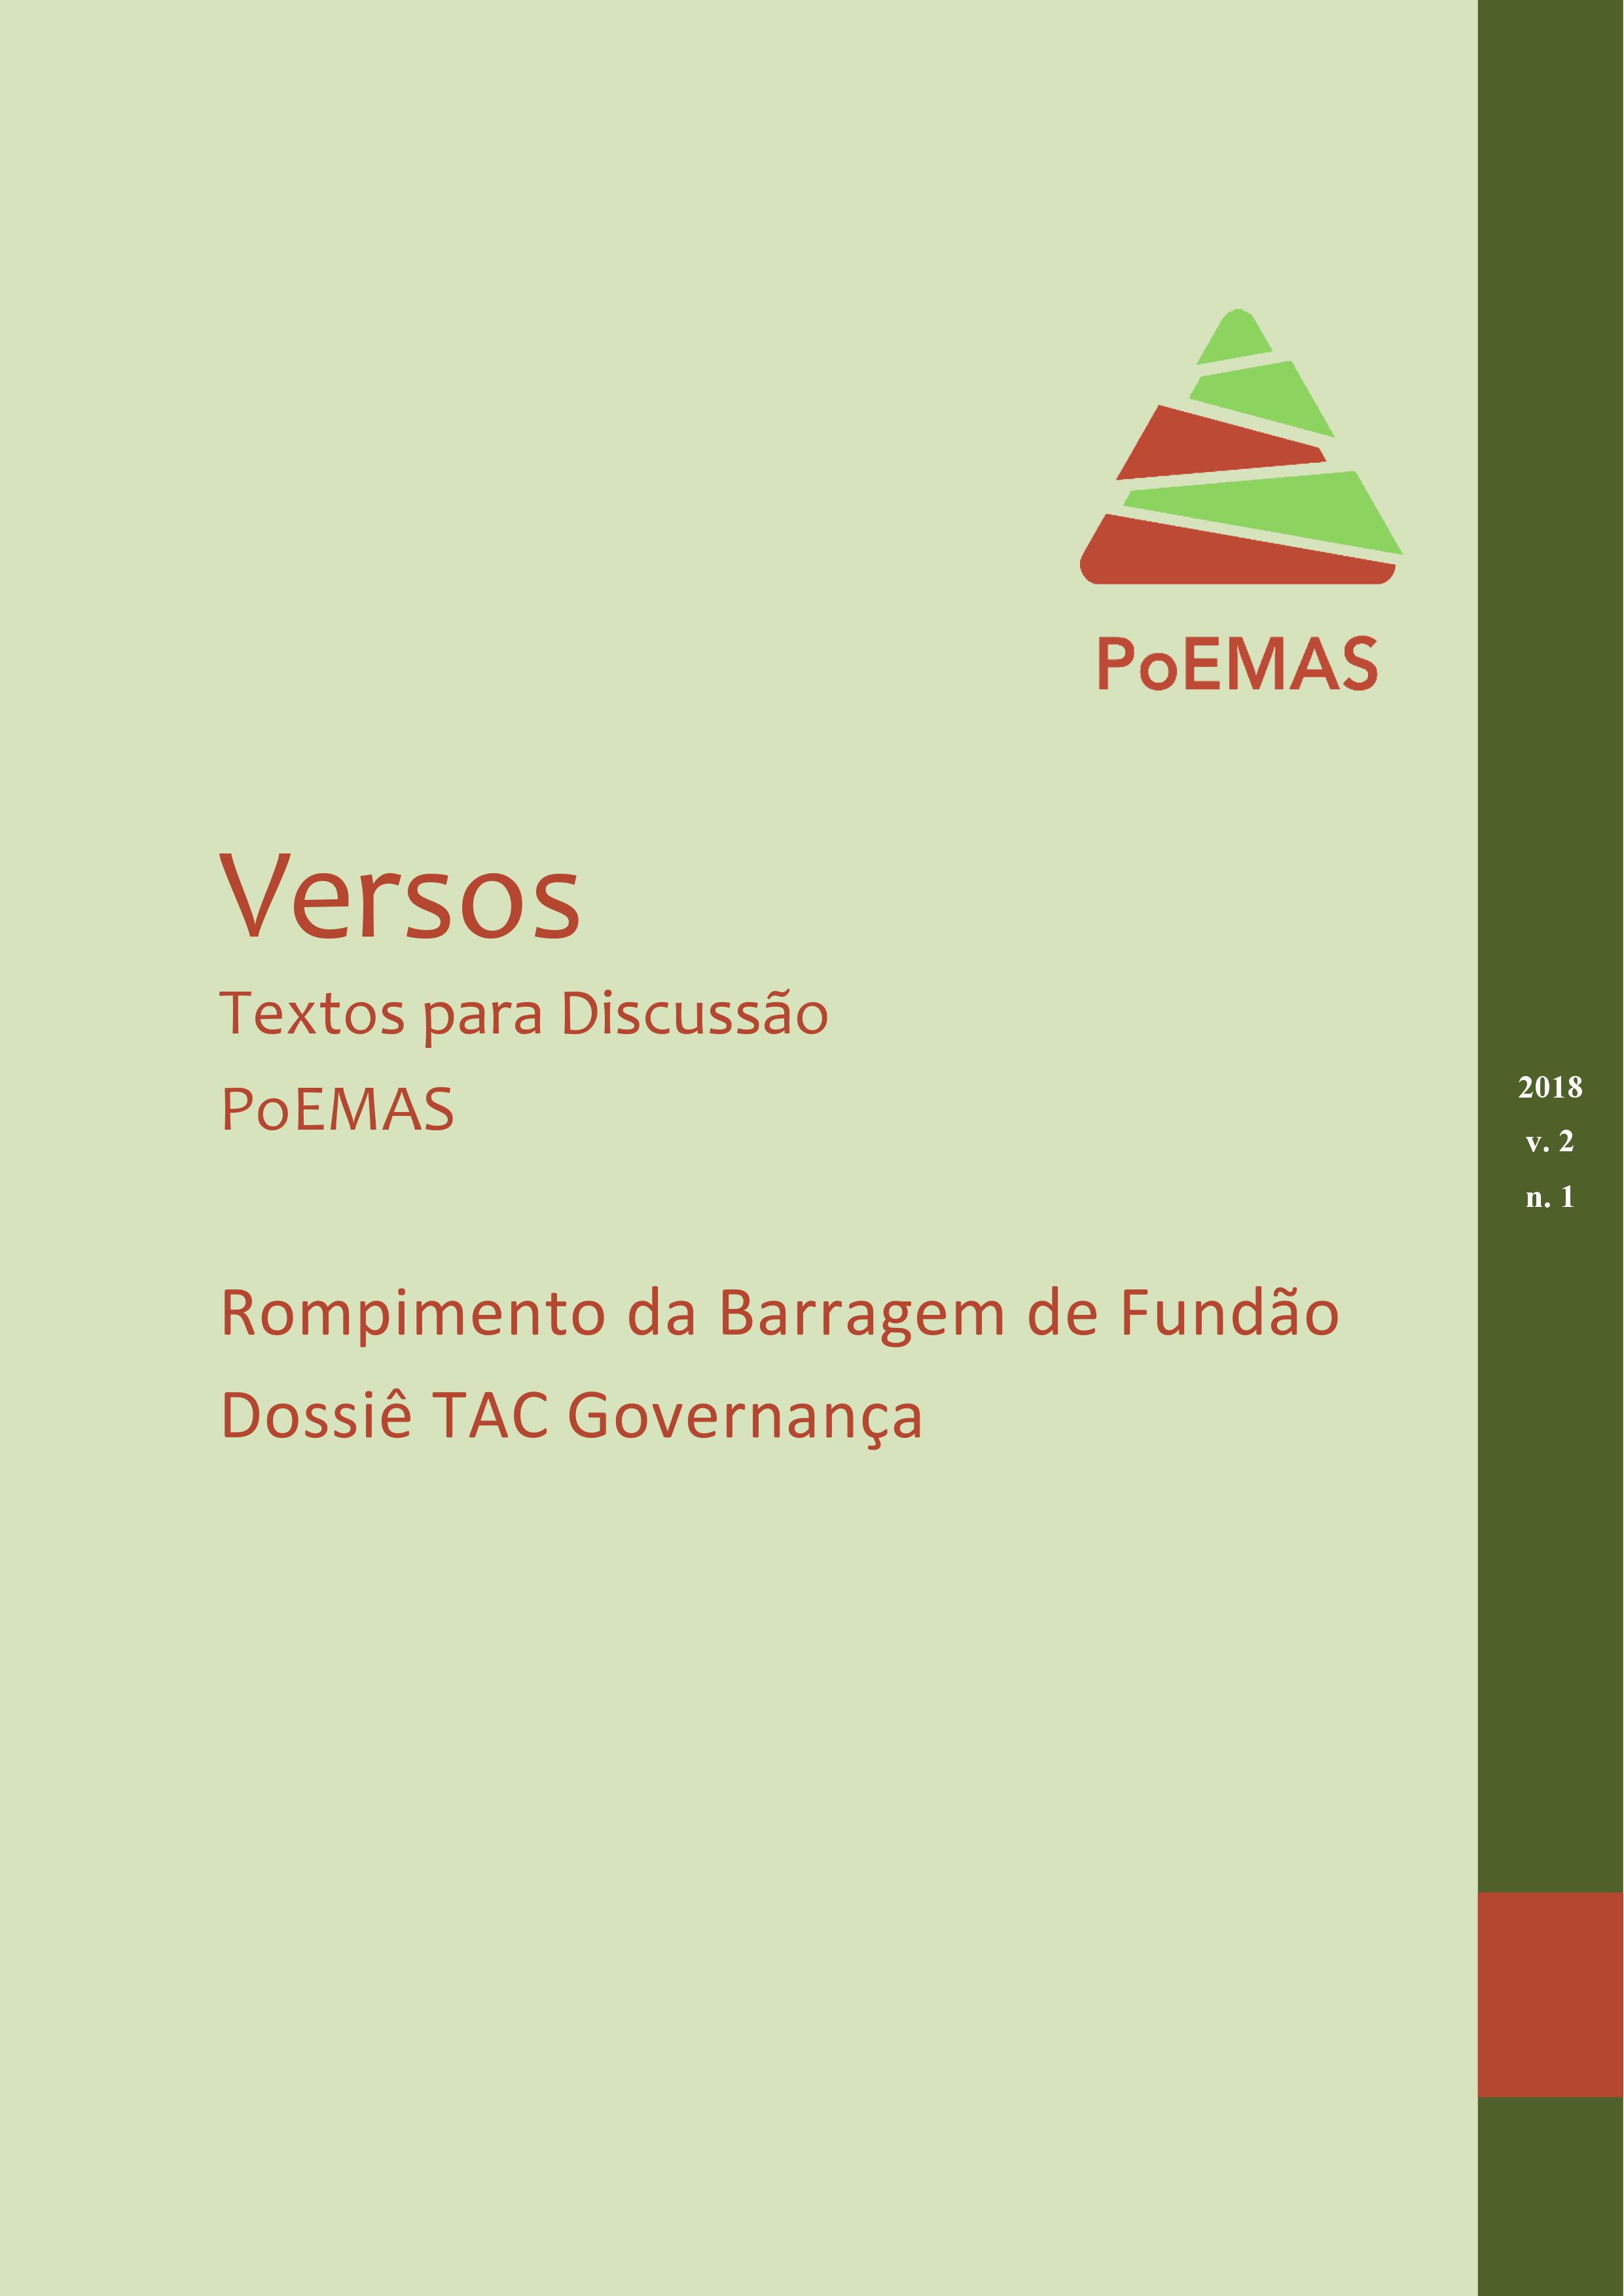 Negotiation in contexts of human rights violations by corporations: A brief analysis of negotiated solution mechanisms in light of the case of the collapse of the Fundão dam